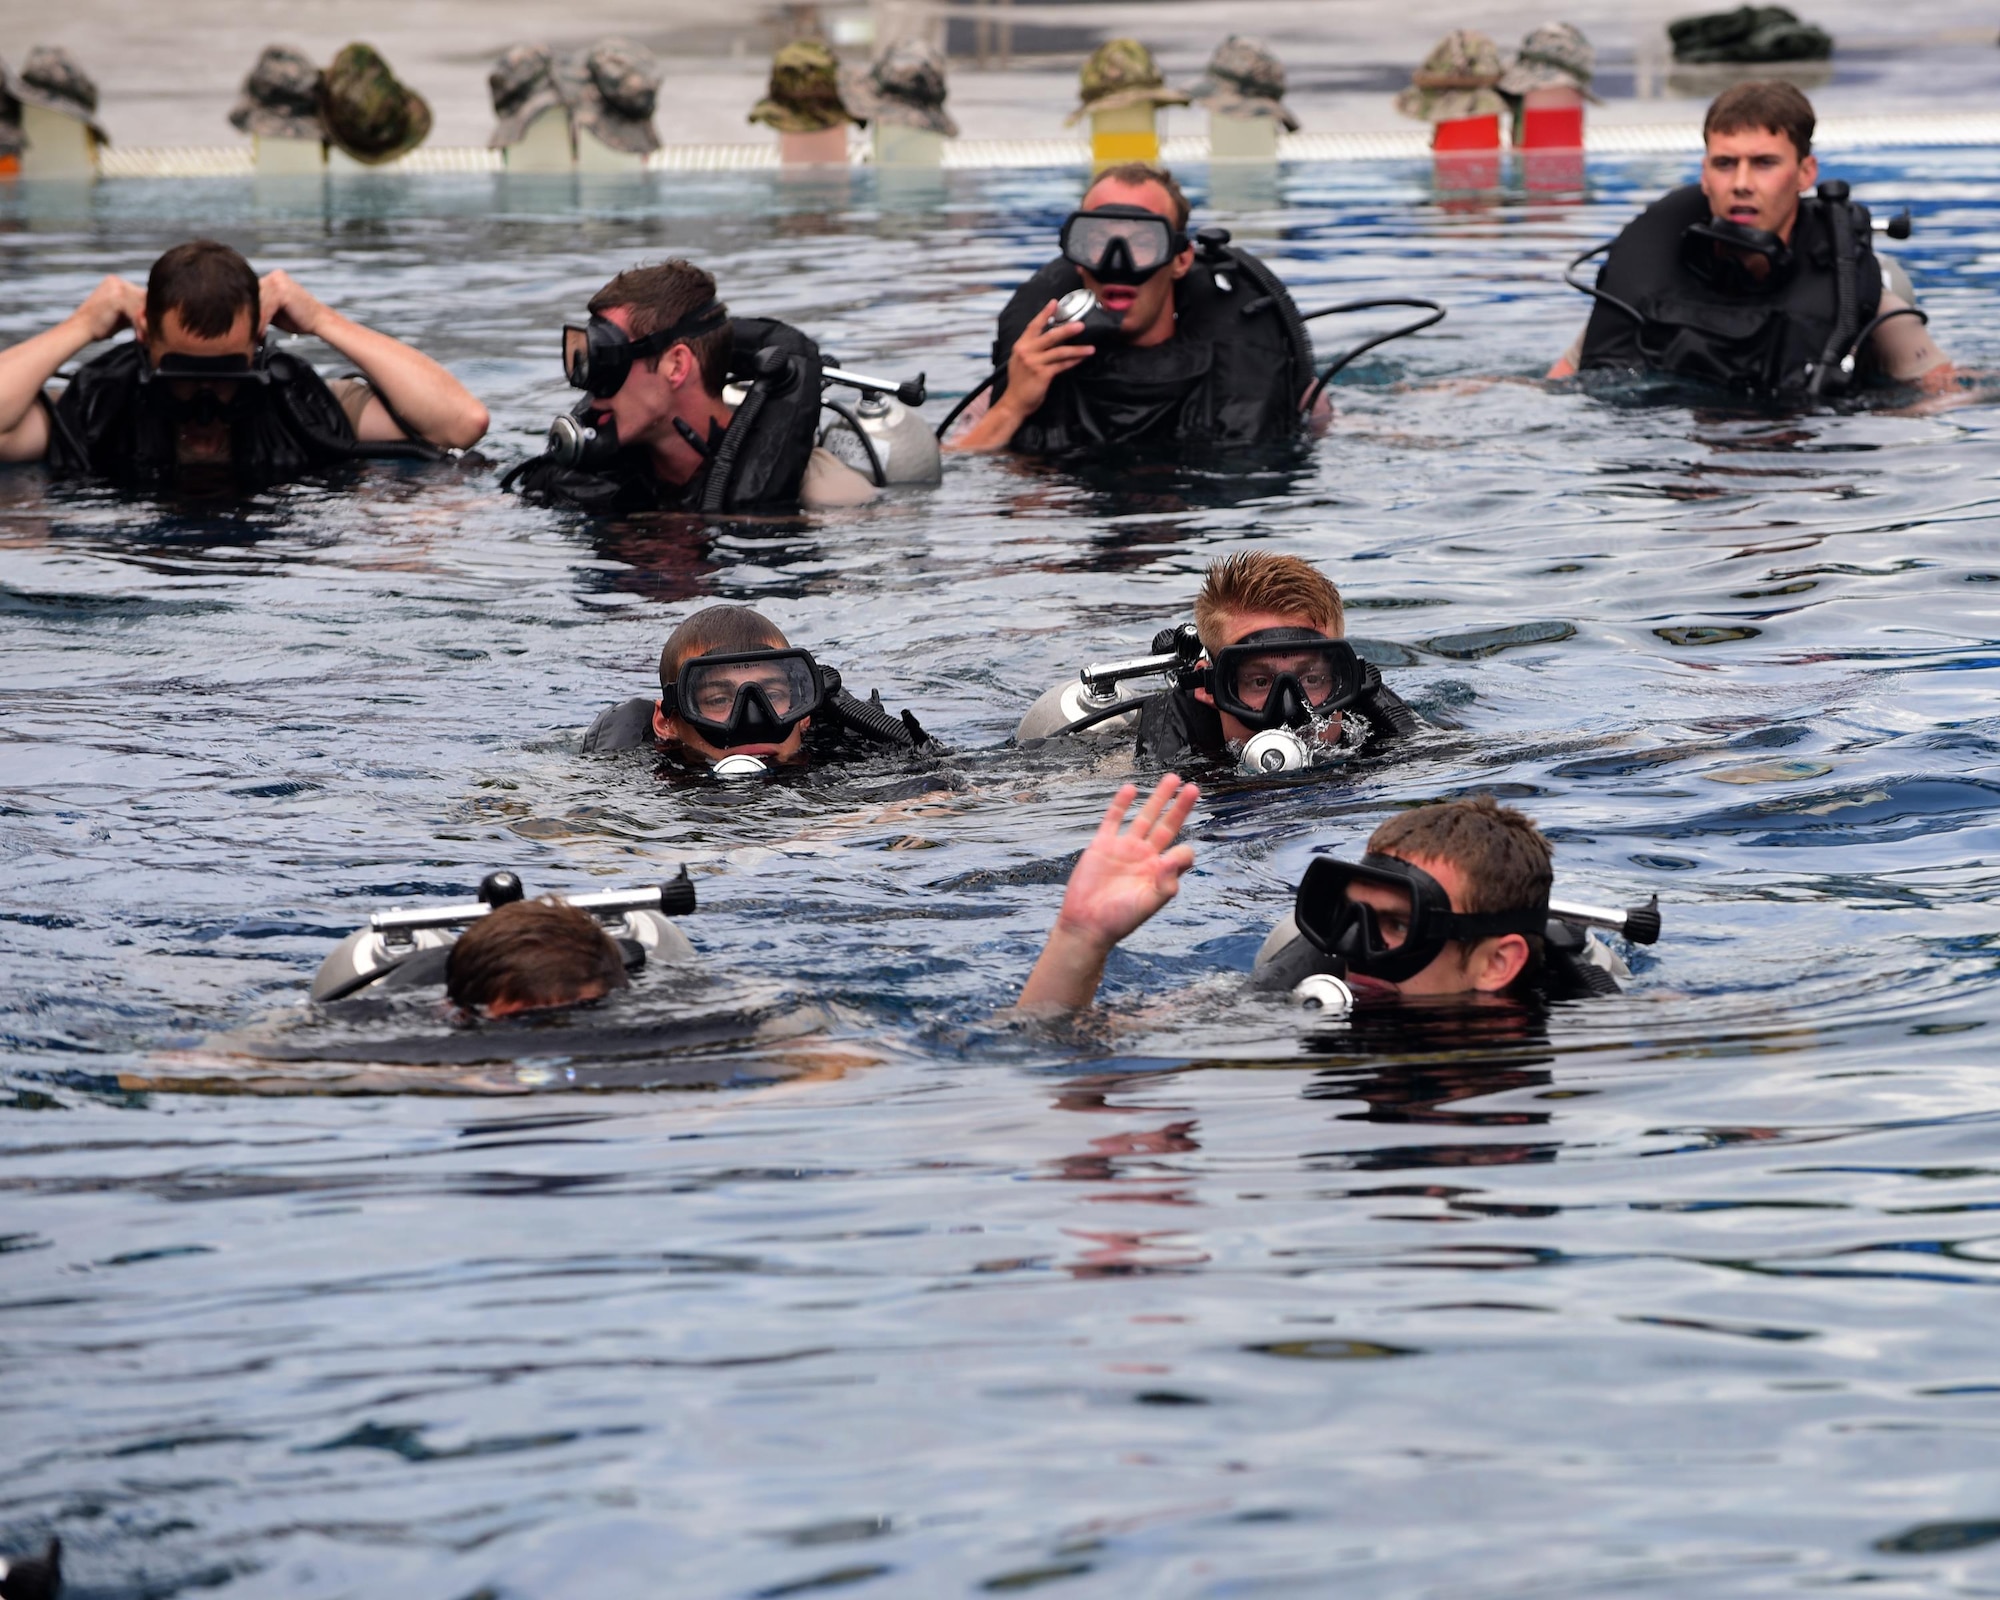 U.S. Air Force diving students begin their training at Naval Support Activity Panama City, Fla., Aug. 3, 2017. The Naval Diving and Salvage Training Center is the home of research, development, testing and evaluation on diving matters. Certification and training is conducted constantly to support the nation's military diving requirements.